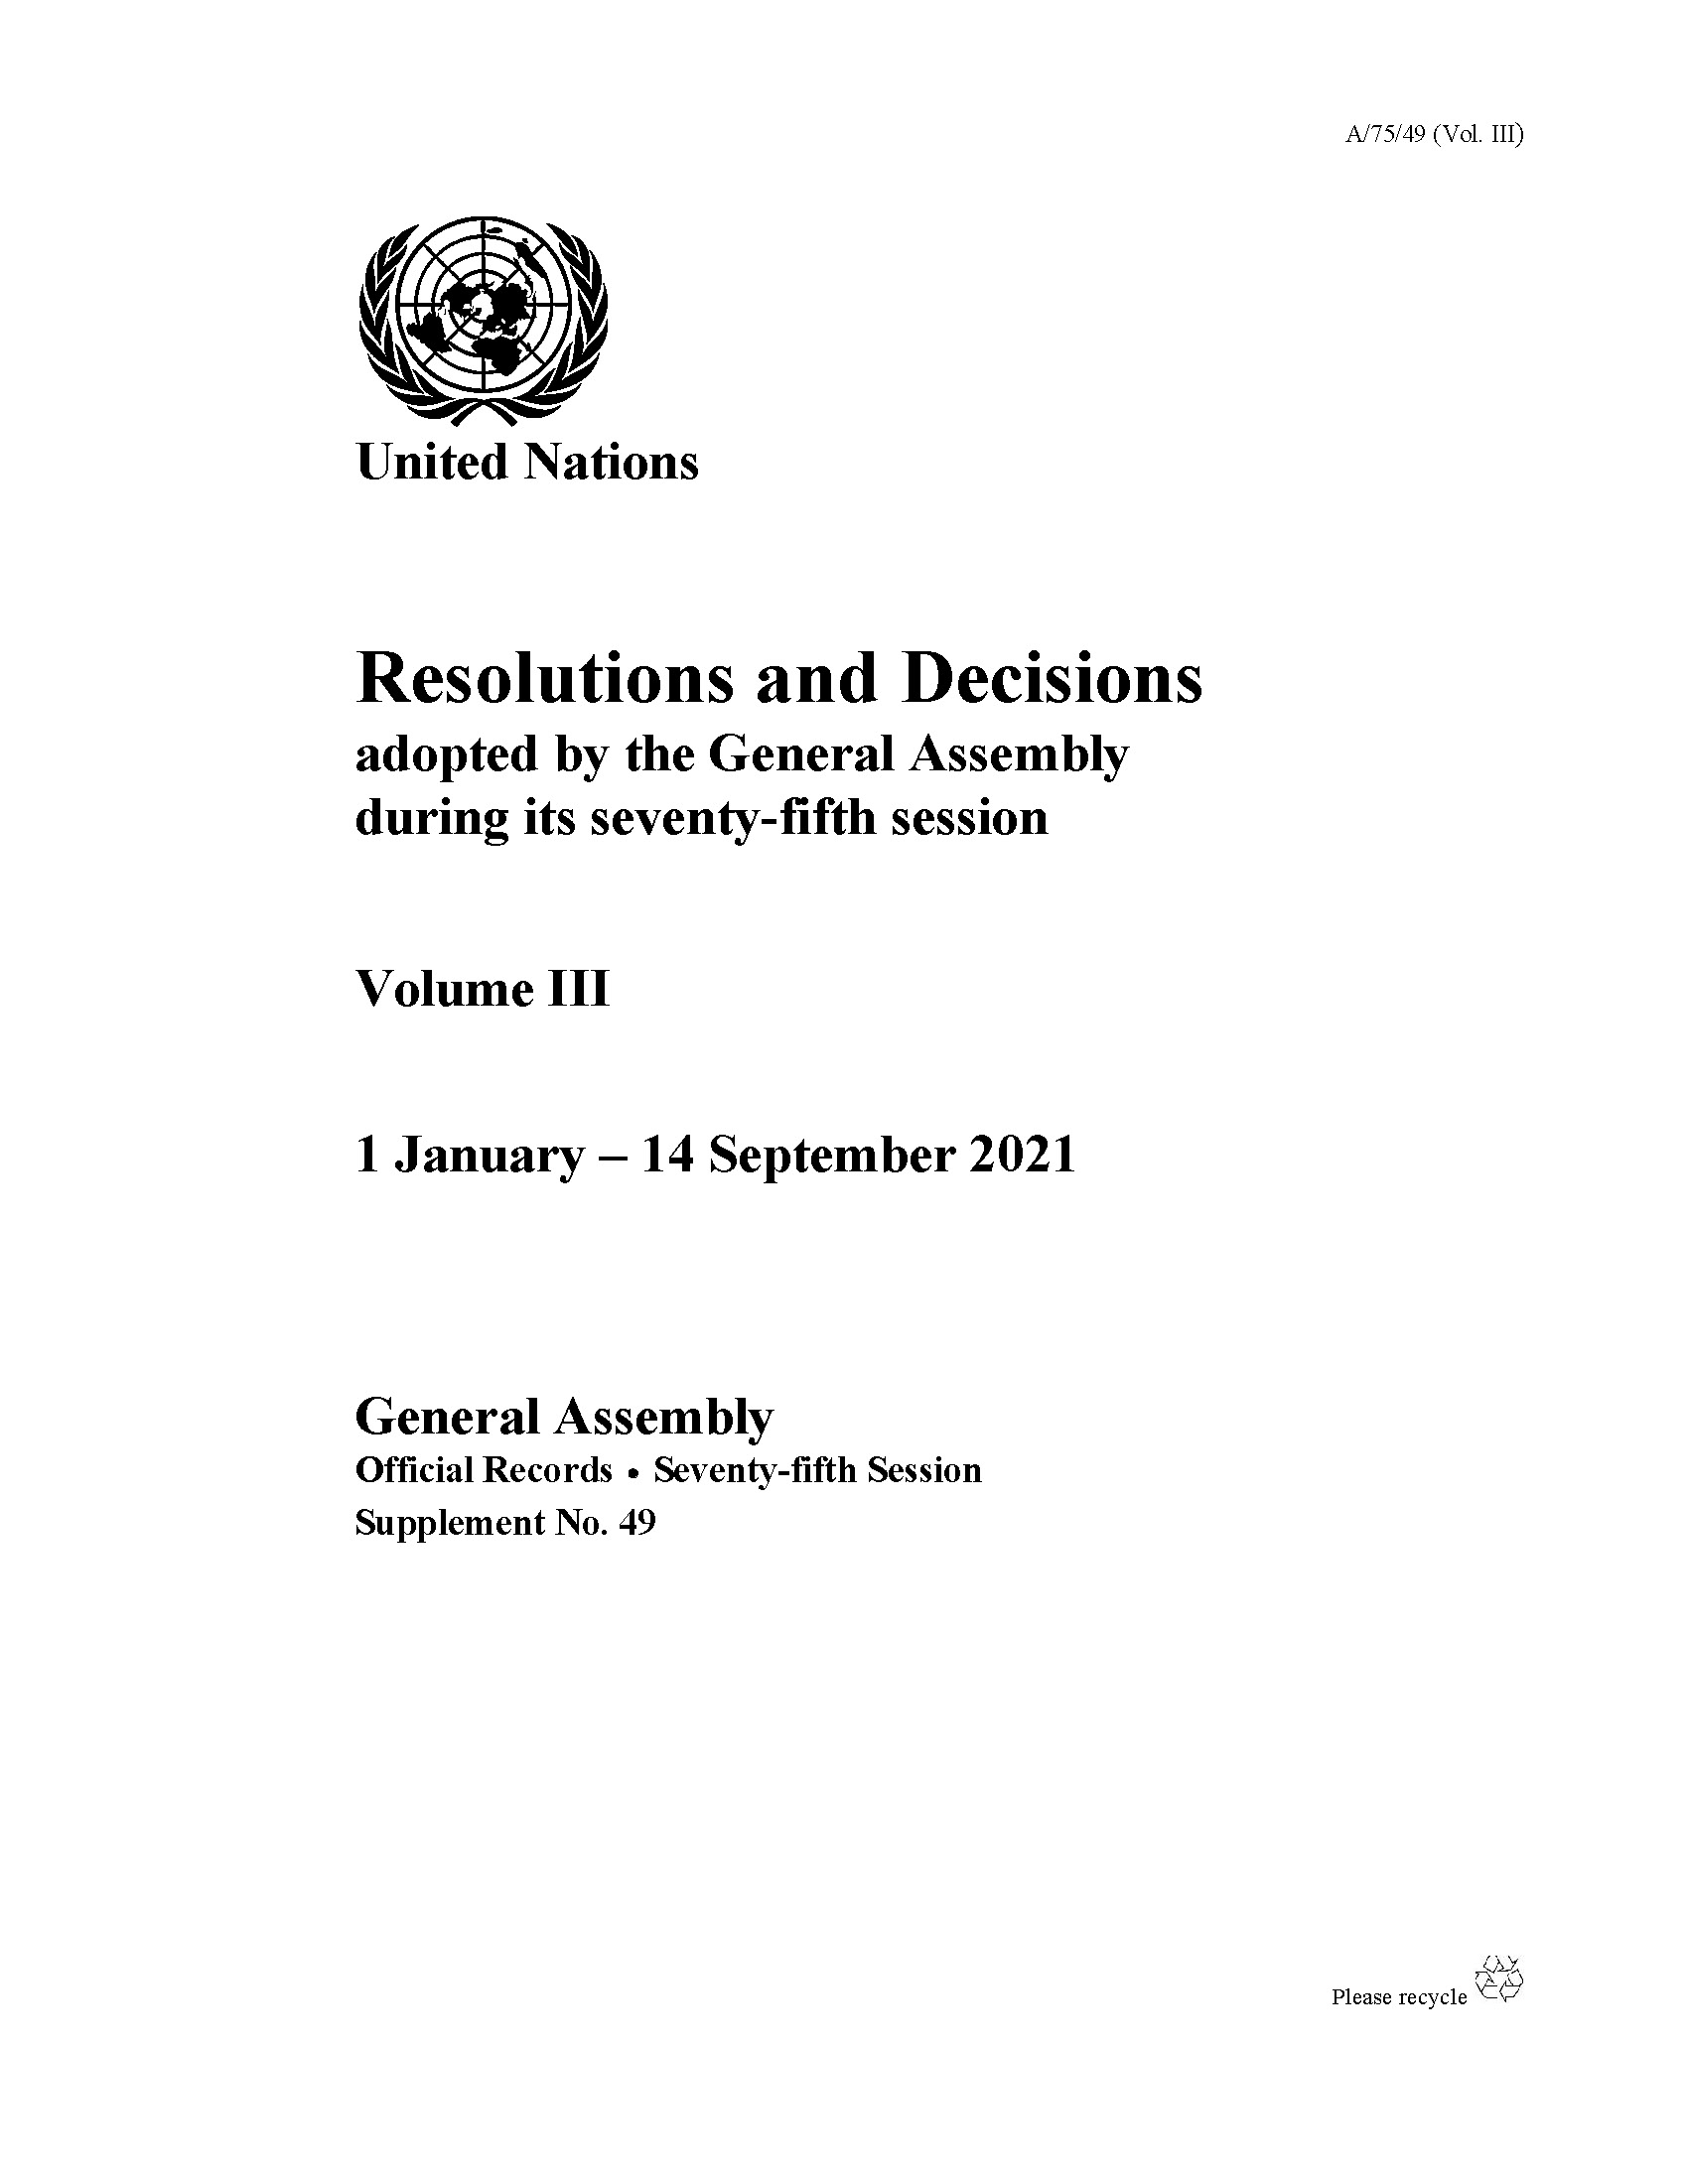 image of Resolutions and Decisions Adopted by the General Assembly During its Seventy-fifth Session: Volume III